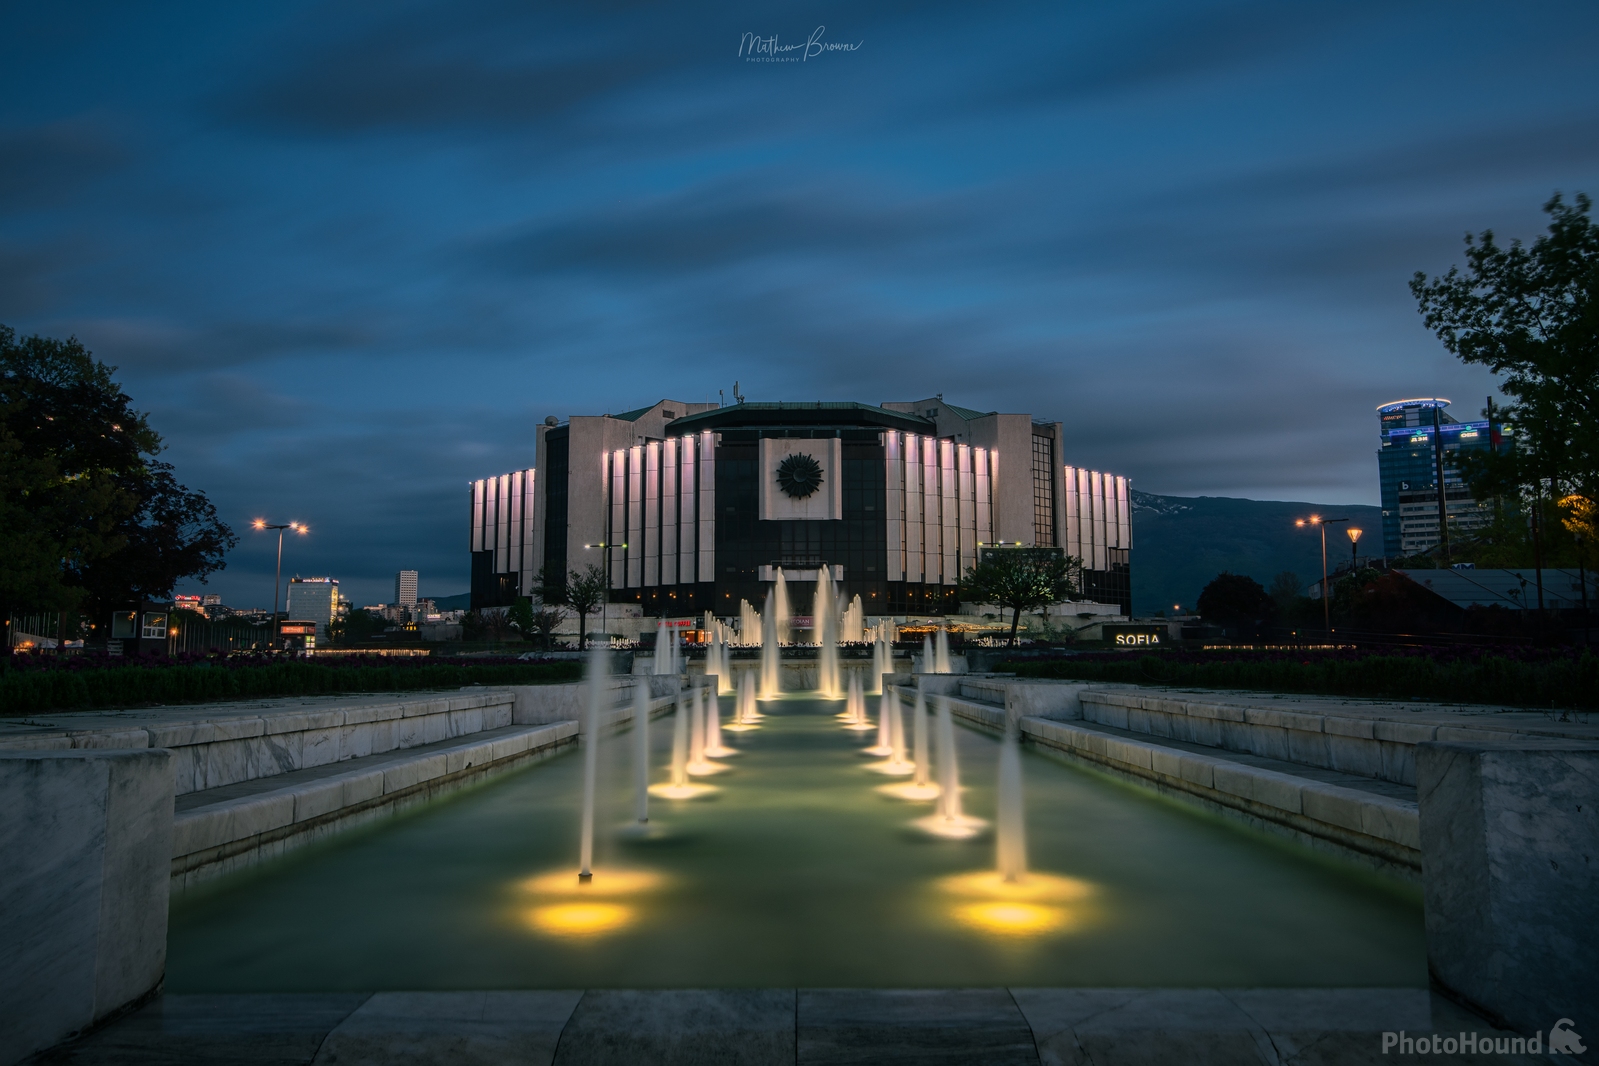 Image of Sofia - National Palace of Culture by Mathew Browne